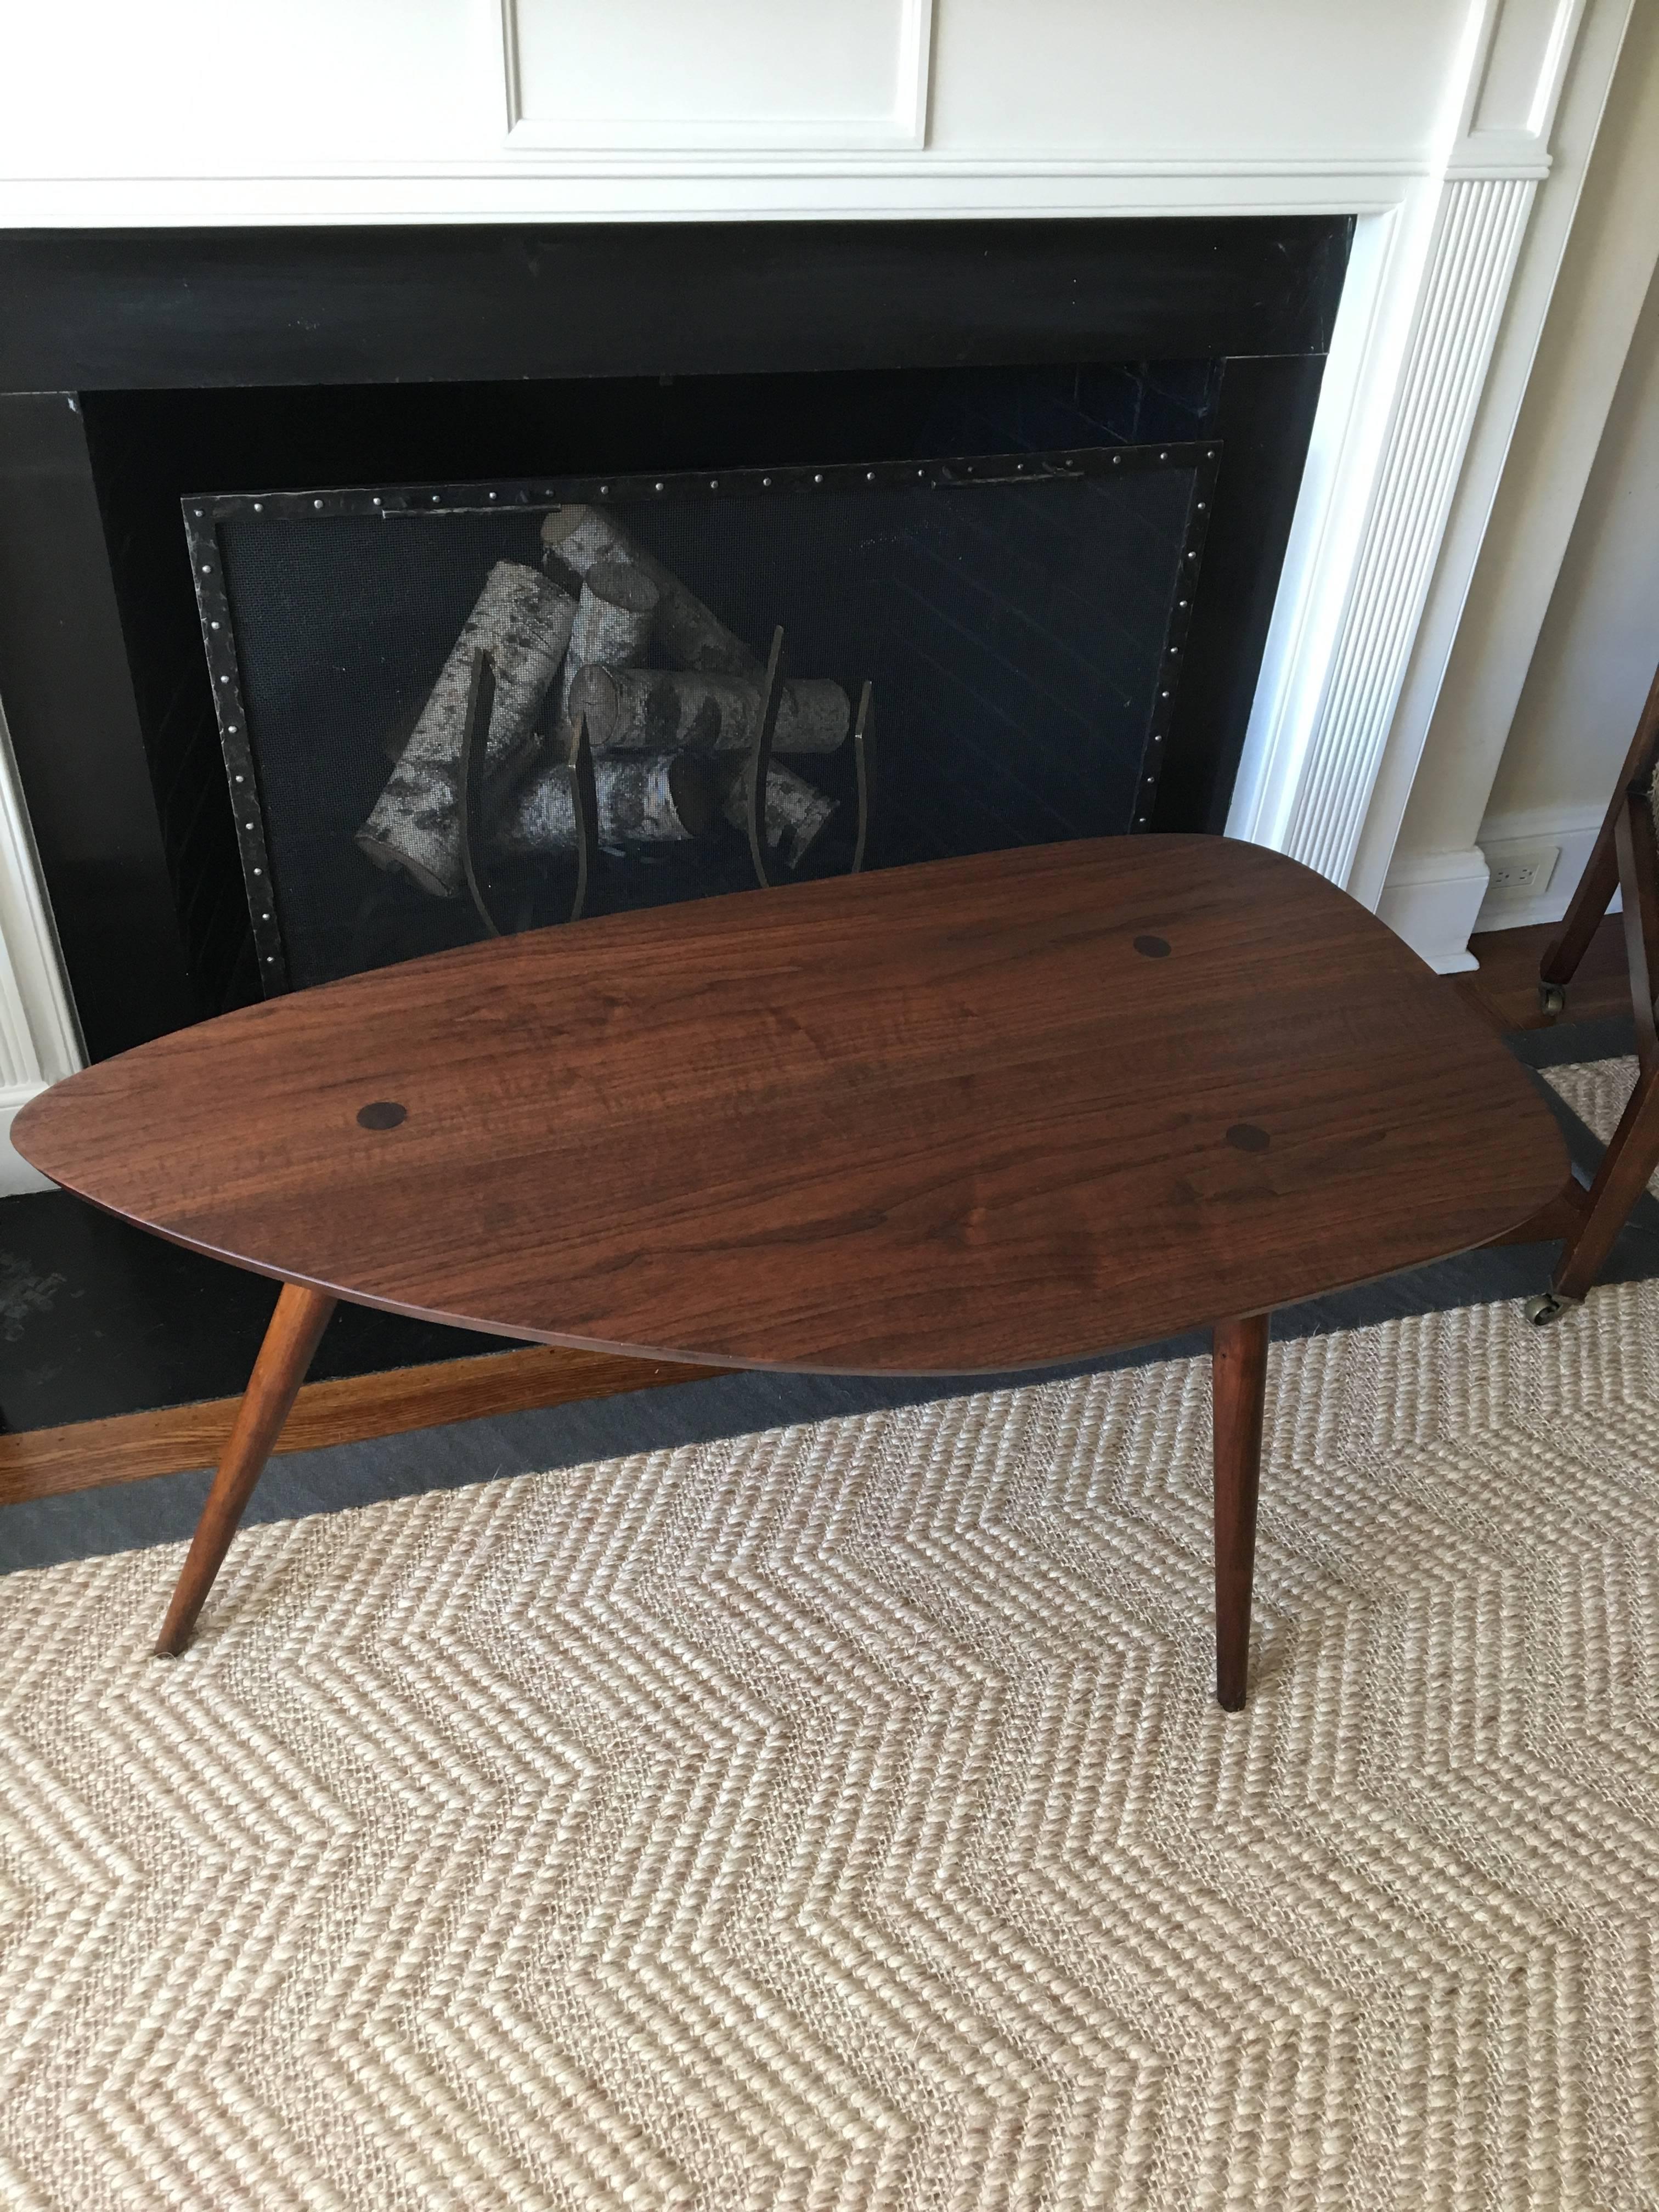 Guitar pick shaped, walnut sculpted table by New Hope studio craftsman Phillip Lloyd Powell, 1960s.
The extra-long top is supported by spindle and tapered legs, beautifully showing joint details and expressive grain.
Table has been cleaned and